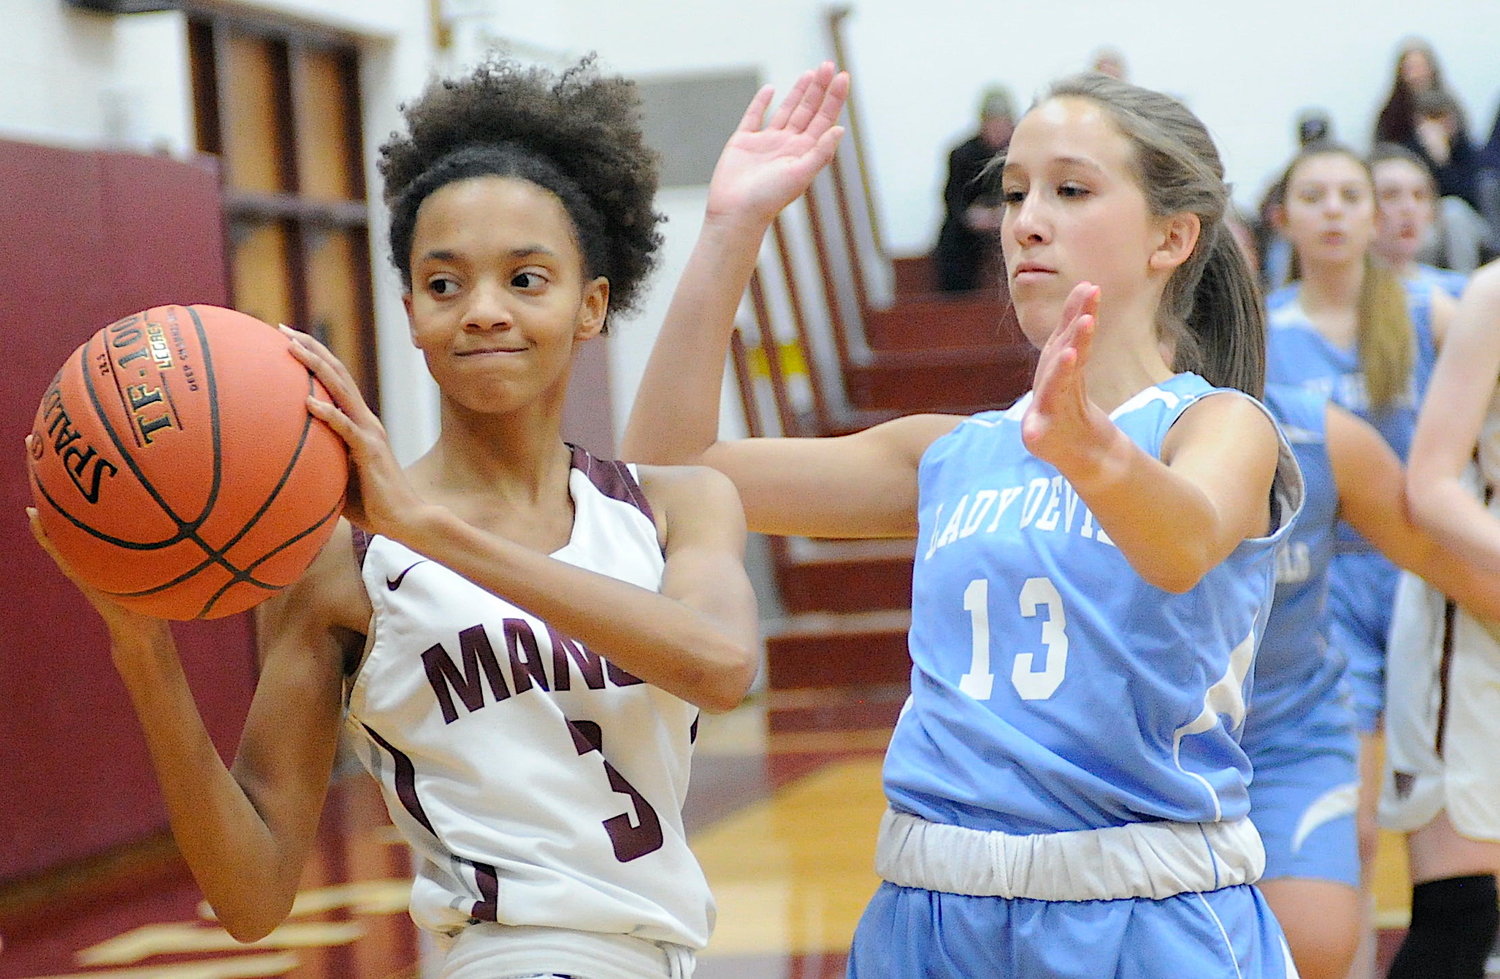 Eyes on the sidelines. Manor’ Nevaeha Jones, a senior guard, posted 8 points. She is pictured with Roscoe’s Athena Niforatos, a junior guard.